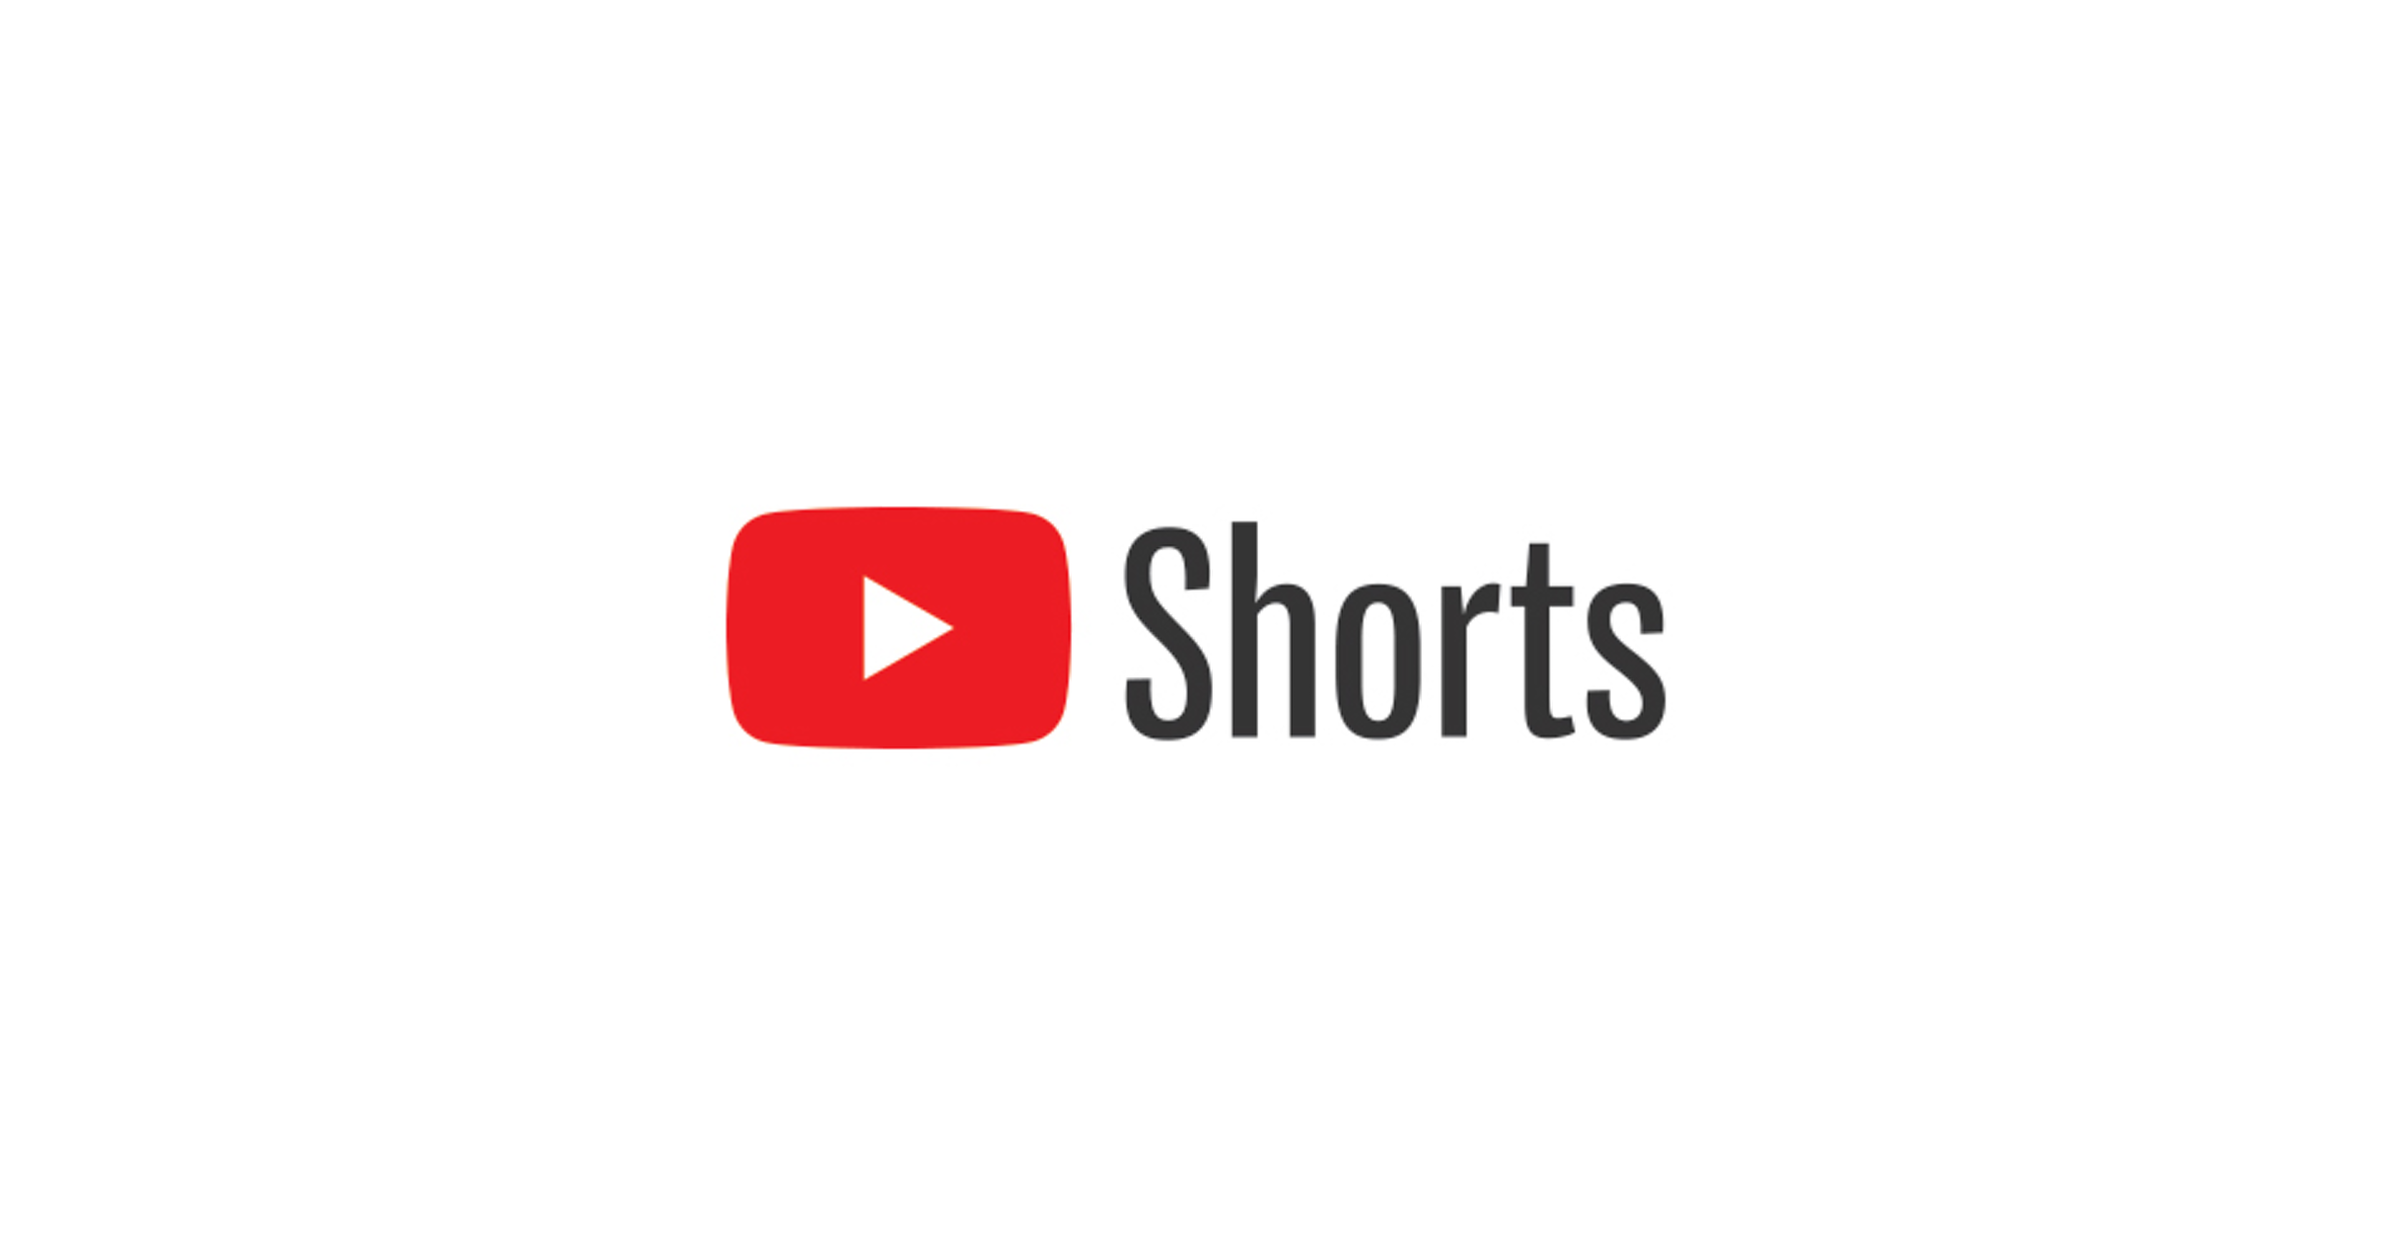 Youtube Shorts now launched in Pakistan - Economy.pk